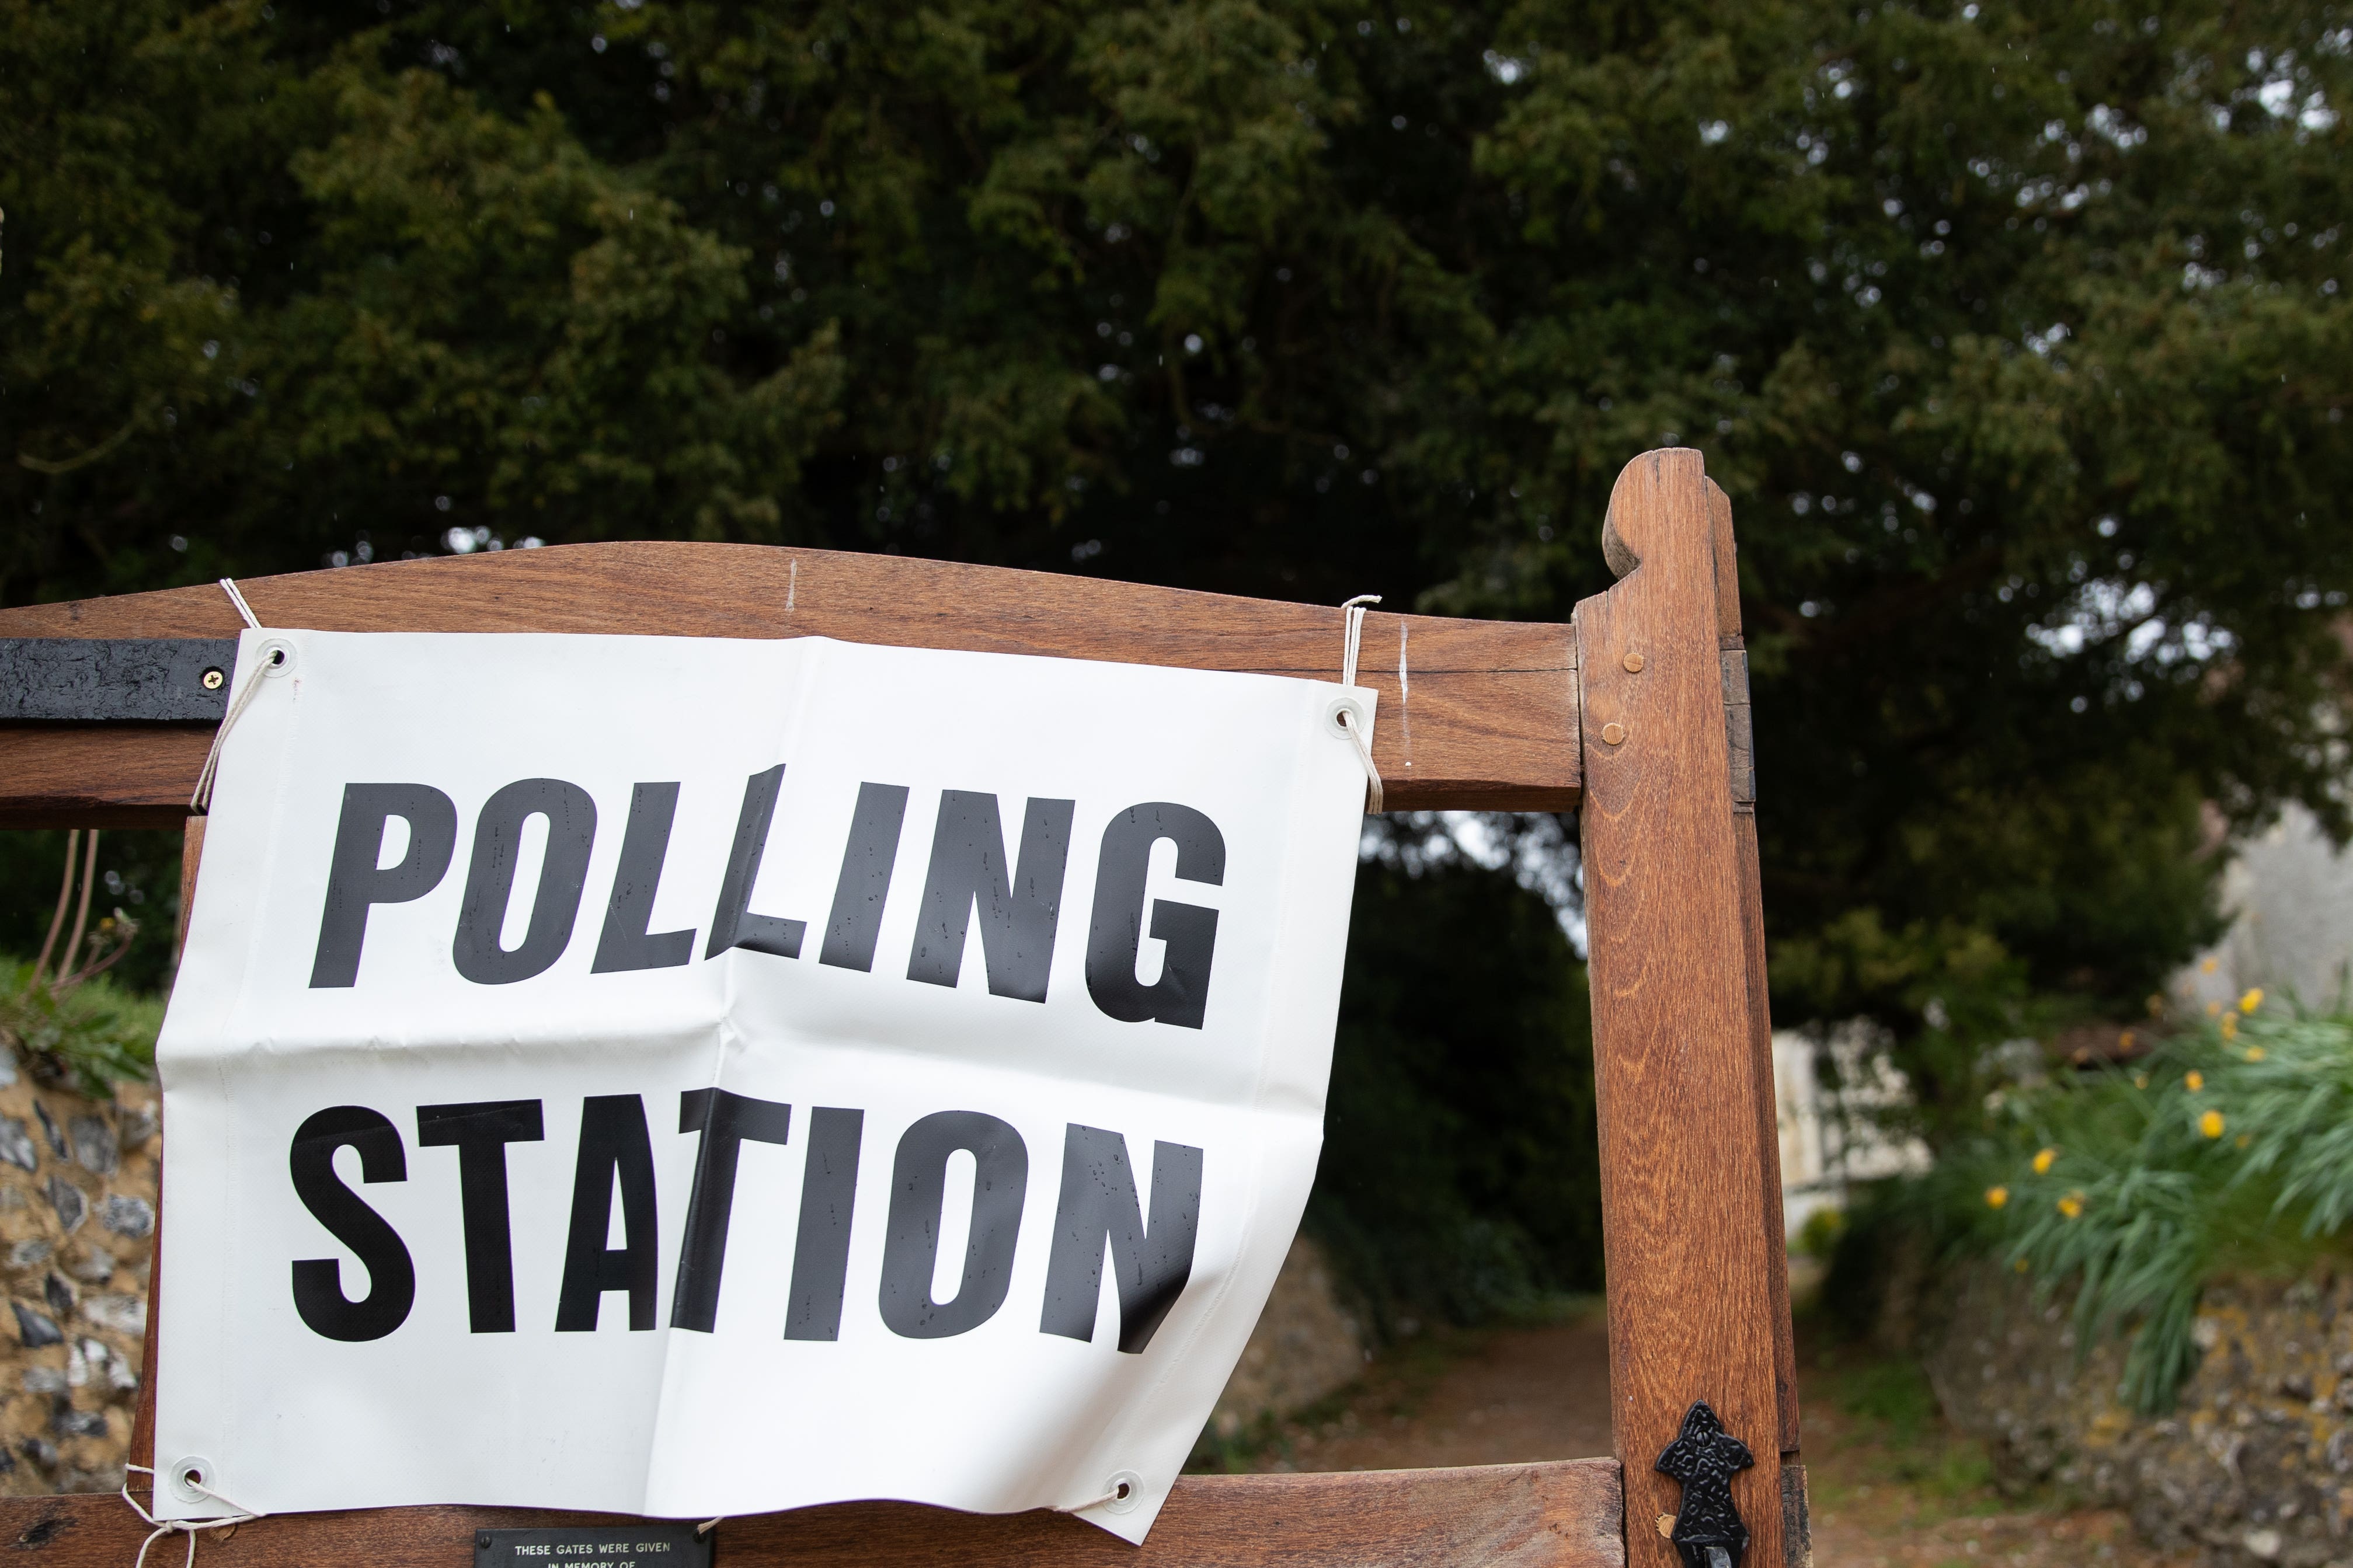 Electoral Commission data in 2019 showed that 25 per cent of Black and Asian Britons were not registered to vote